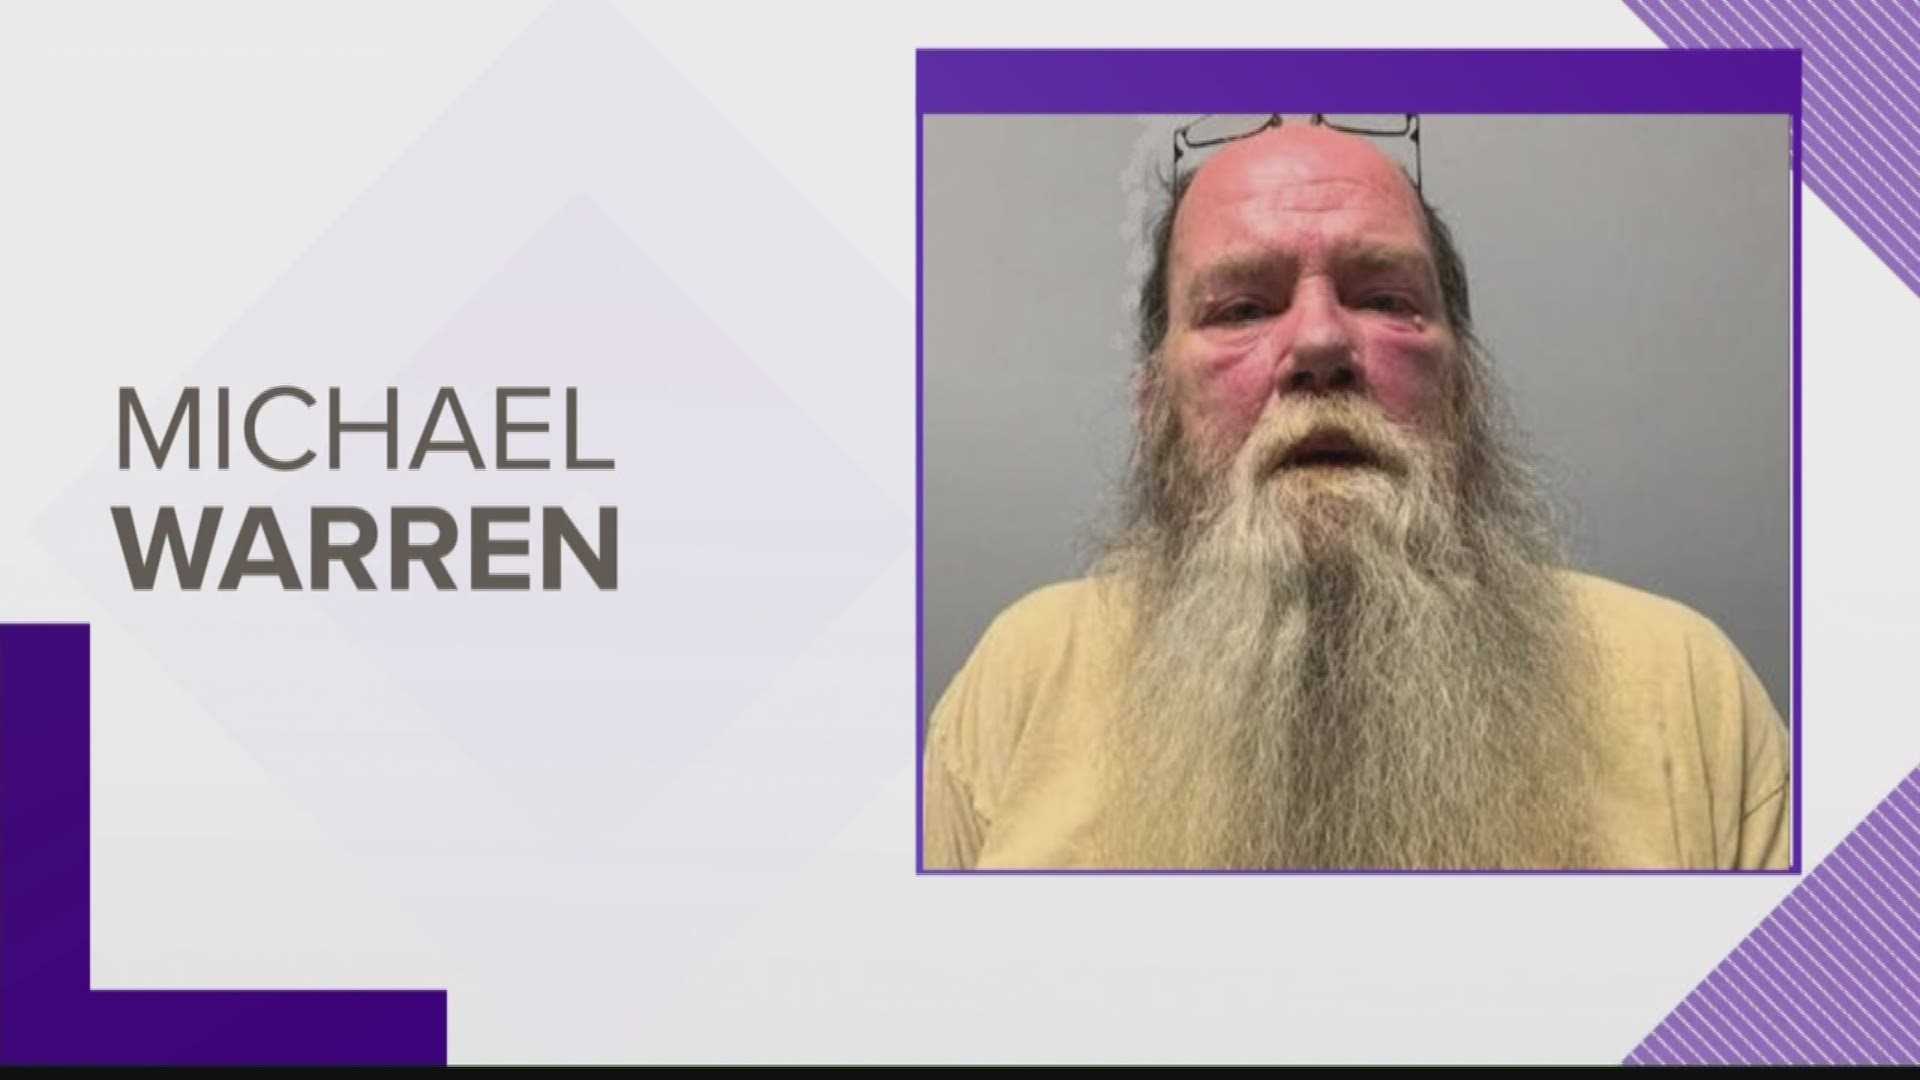 Fryeburg man reportedly fired shots during argument while children slept nearby